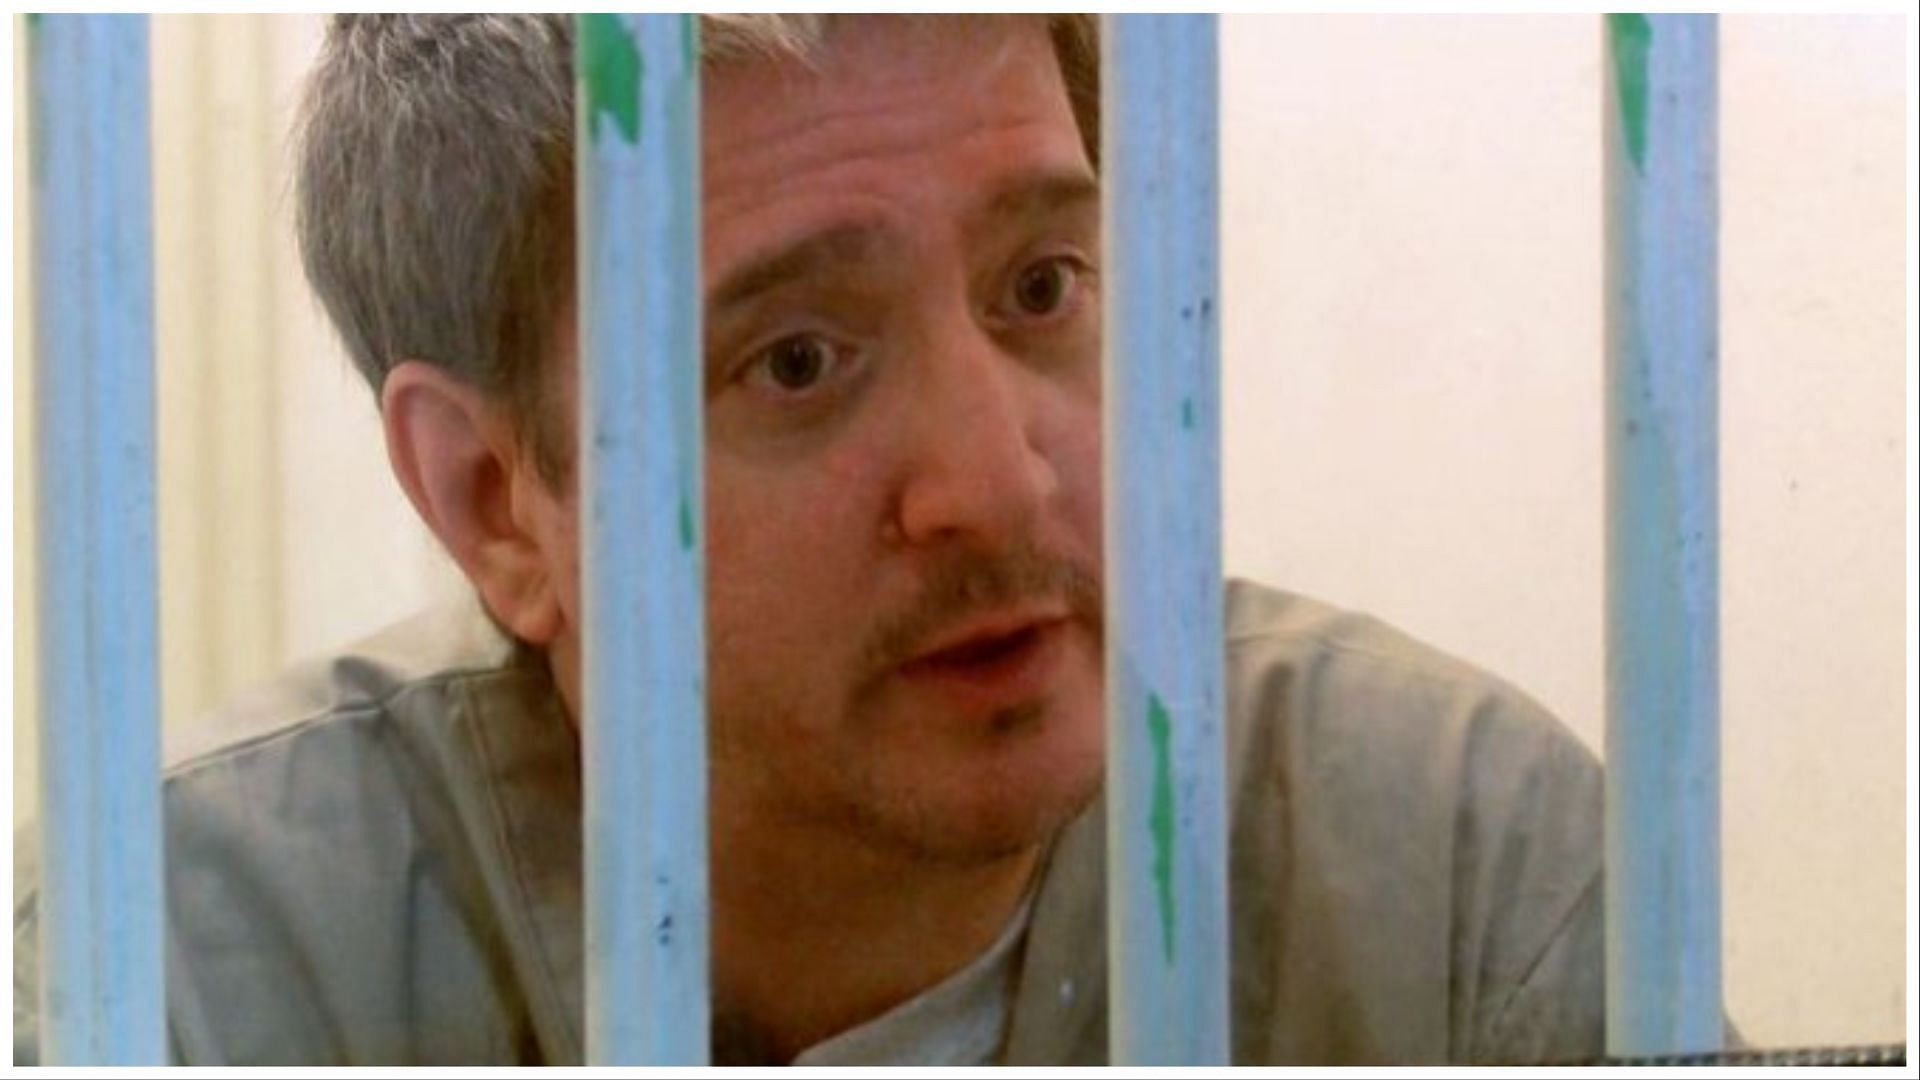 Oklahoma death row inmate Richard Glossip is scheduled to be executed in May 2023, (Image via Lula Gutierrez/Twitter)